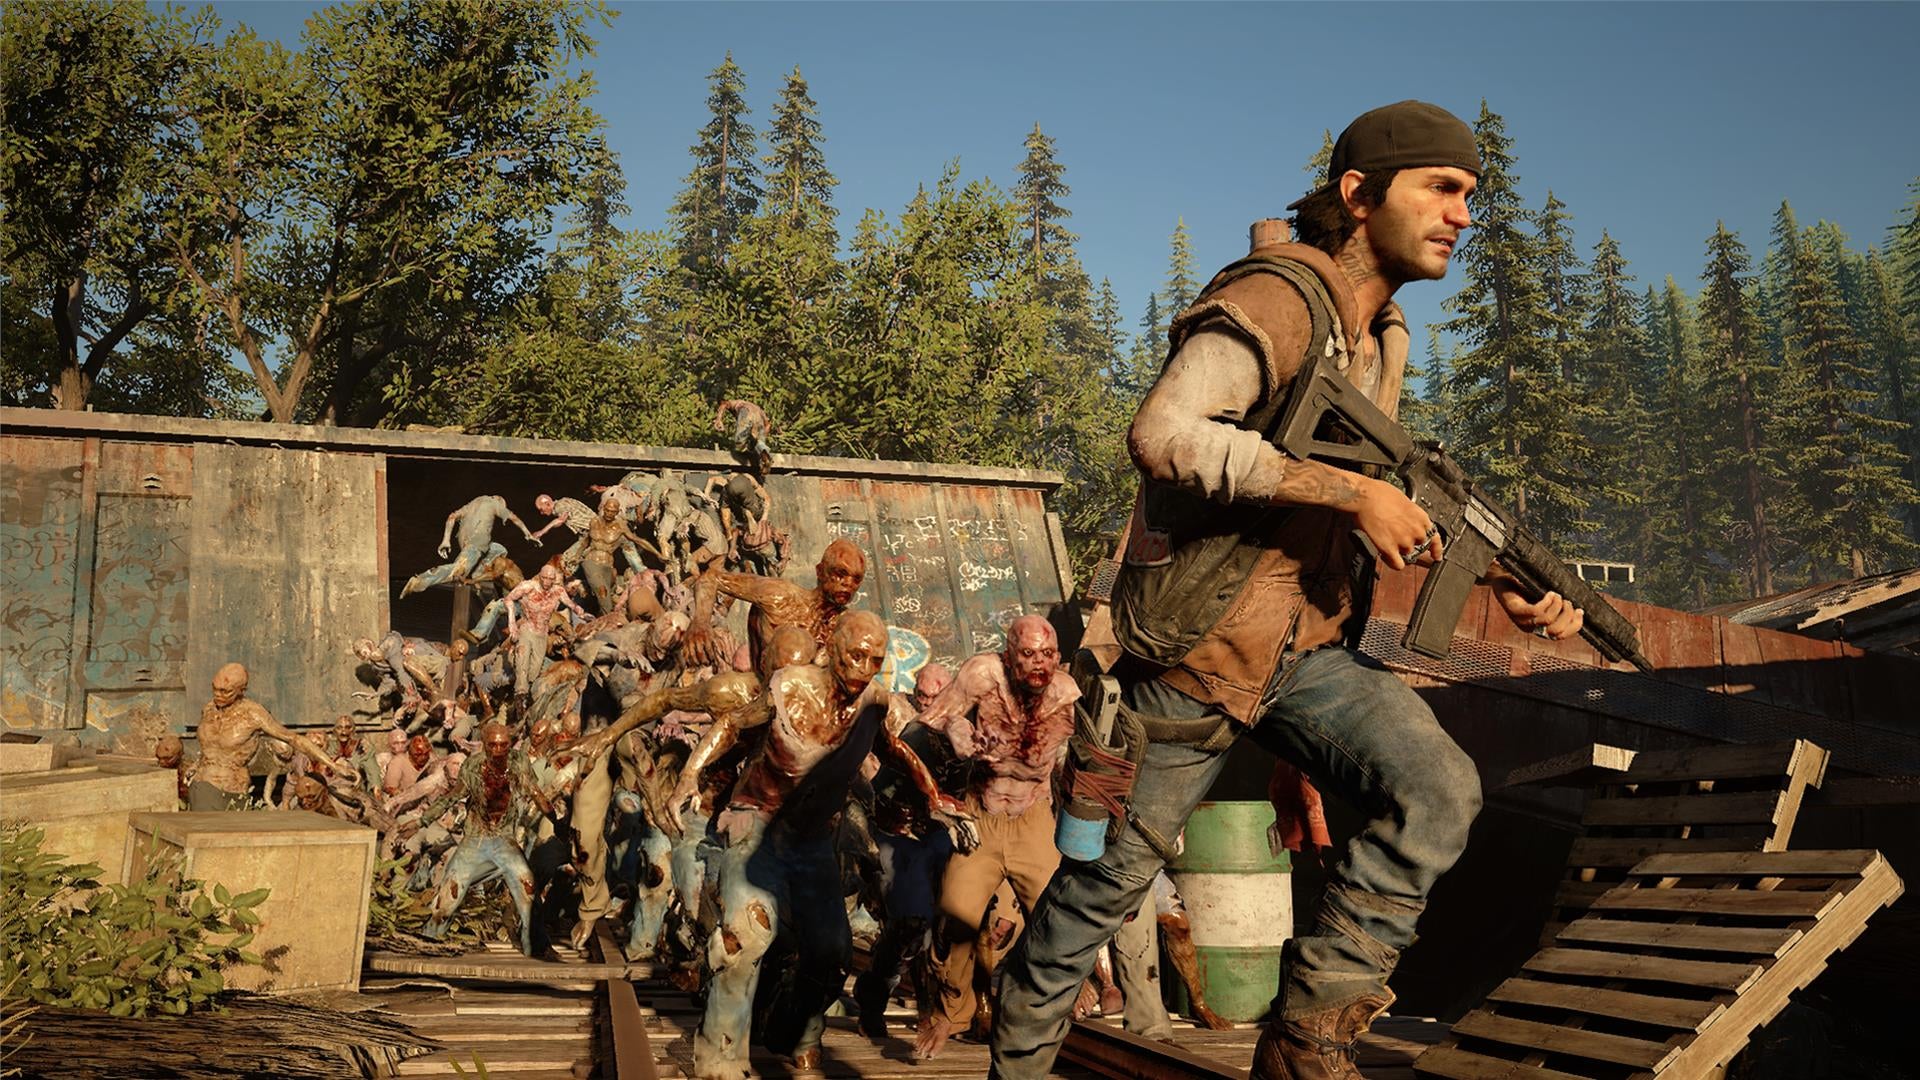 Image for Days Gone's "freakers" behavior reflects game world